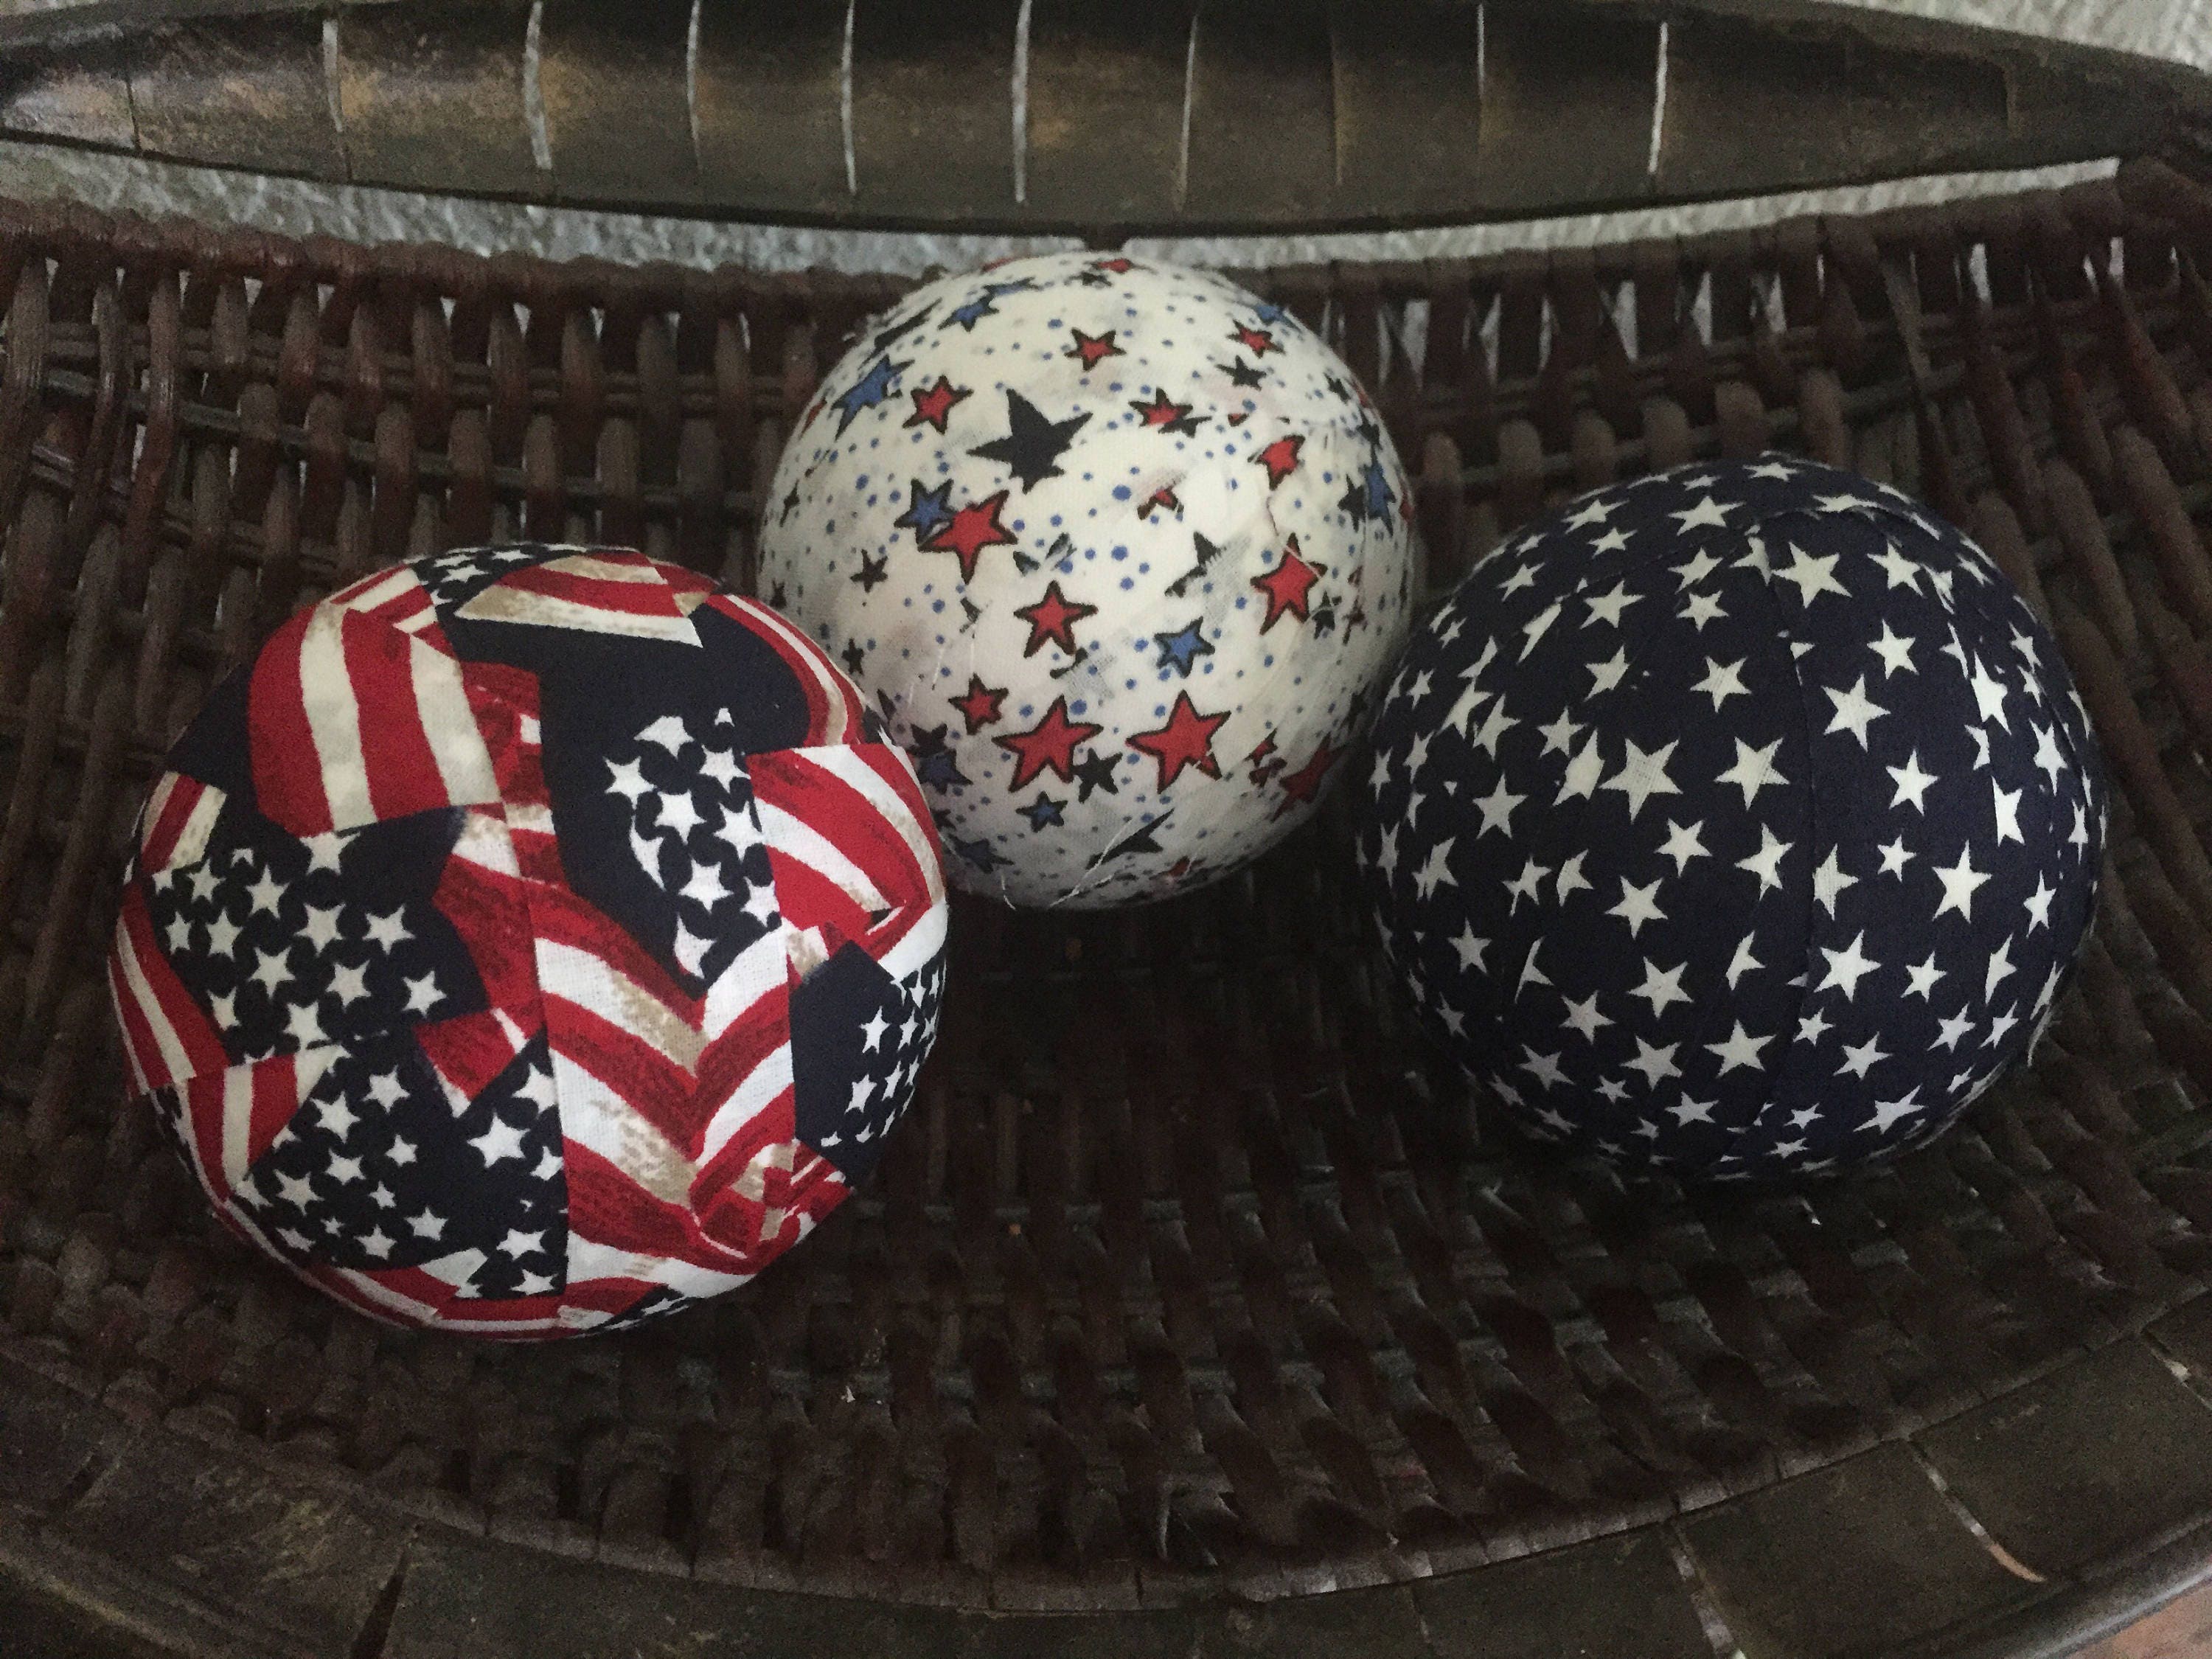 Patriotic red white blue decorative fabric balls for bowl or